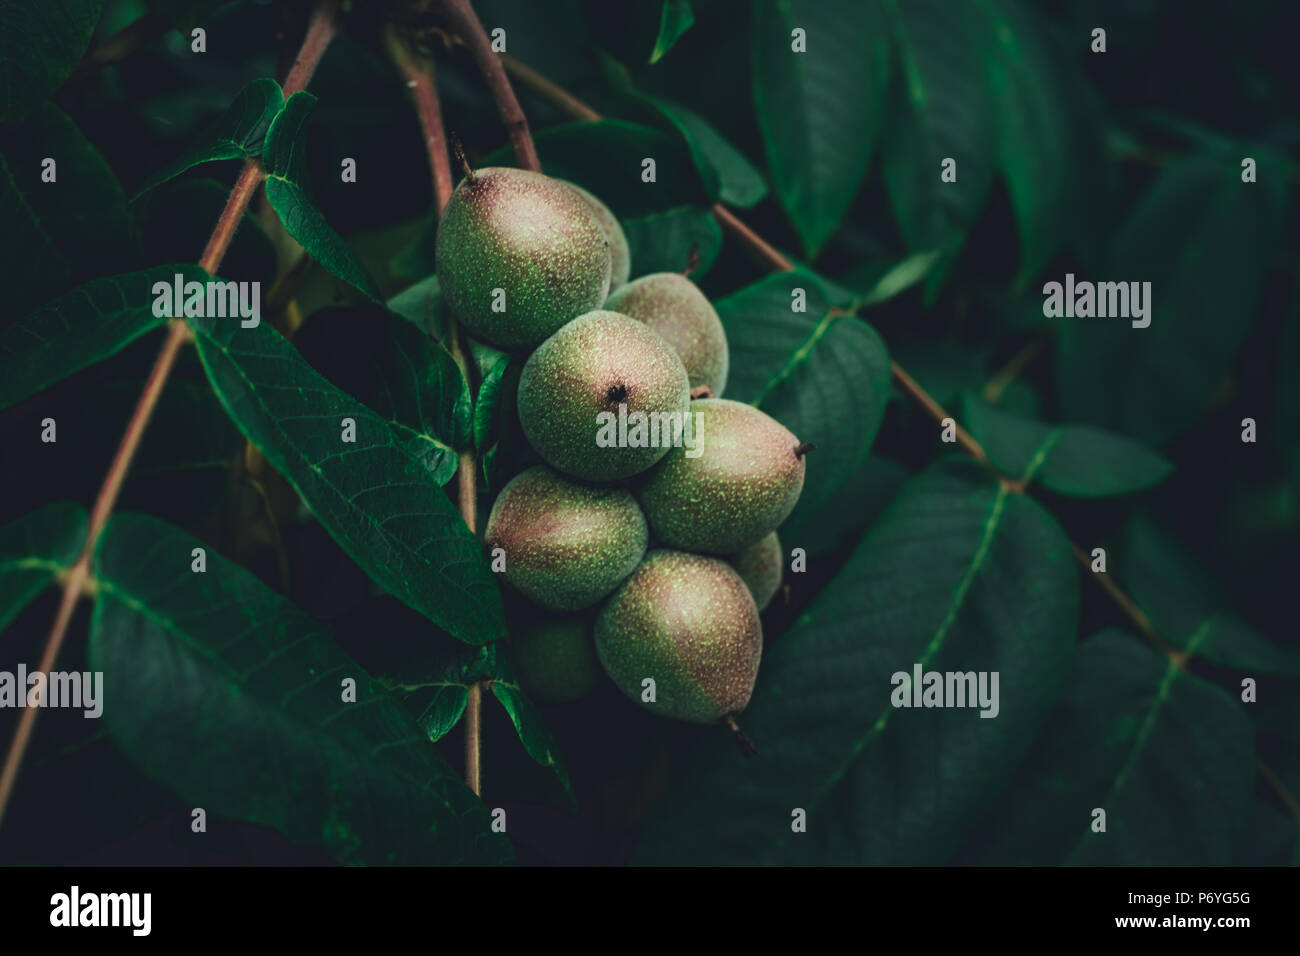 Green plant branches with round fruits Stock Photo